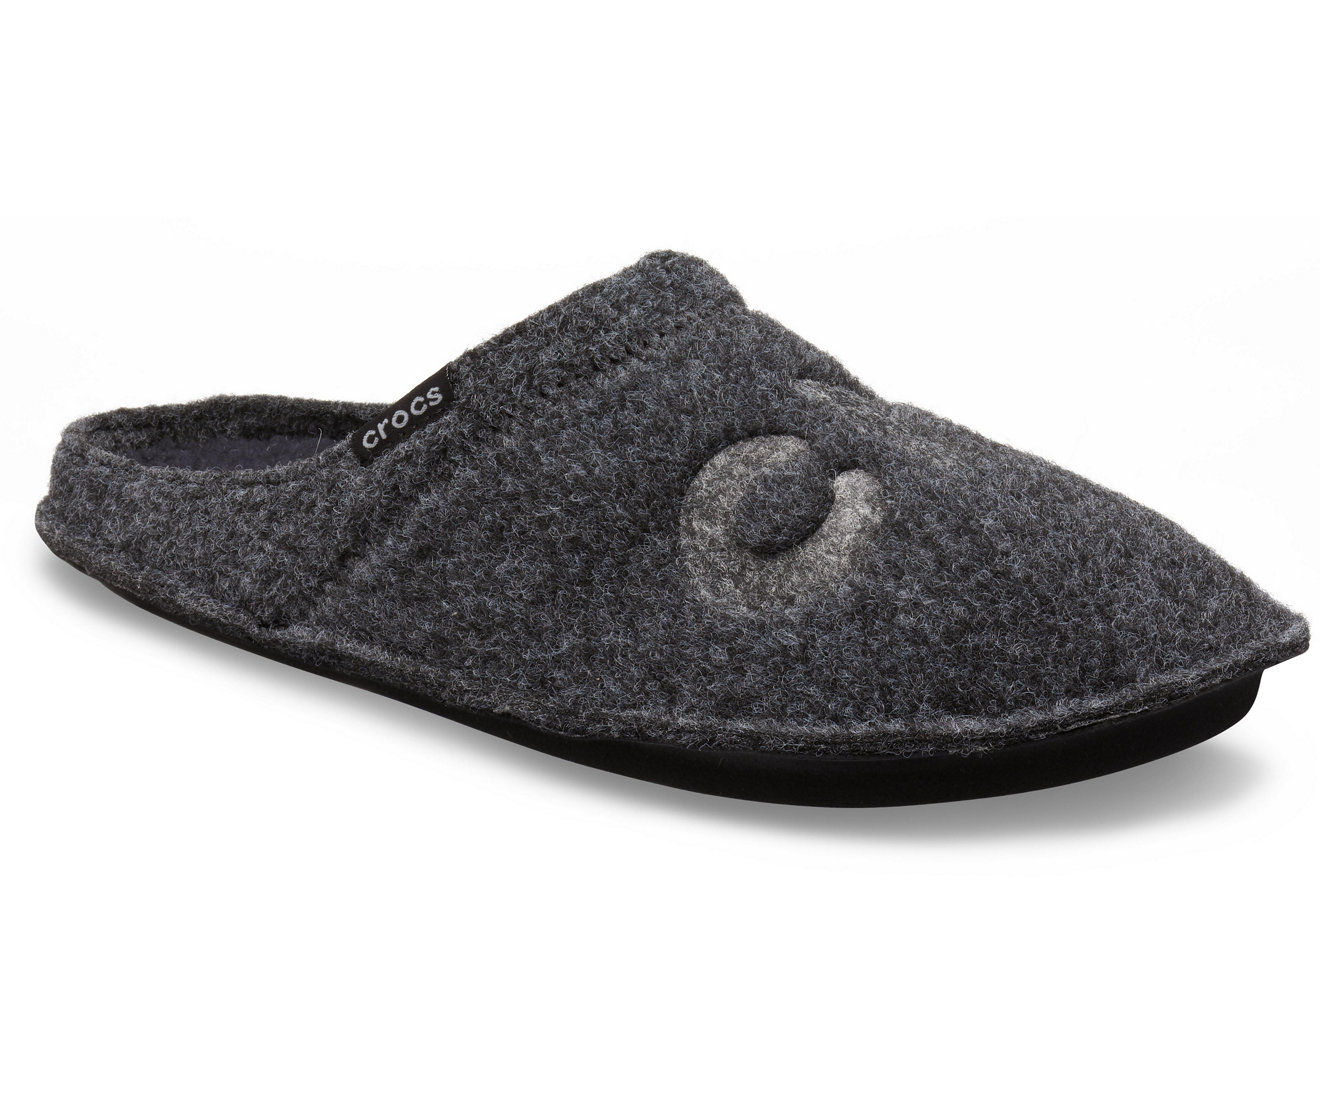 Buy Crocs Women Classic Slippers Online at Low Prices in India -  Paytmmall.com